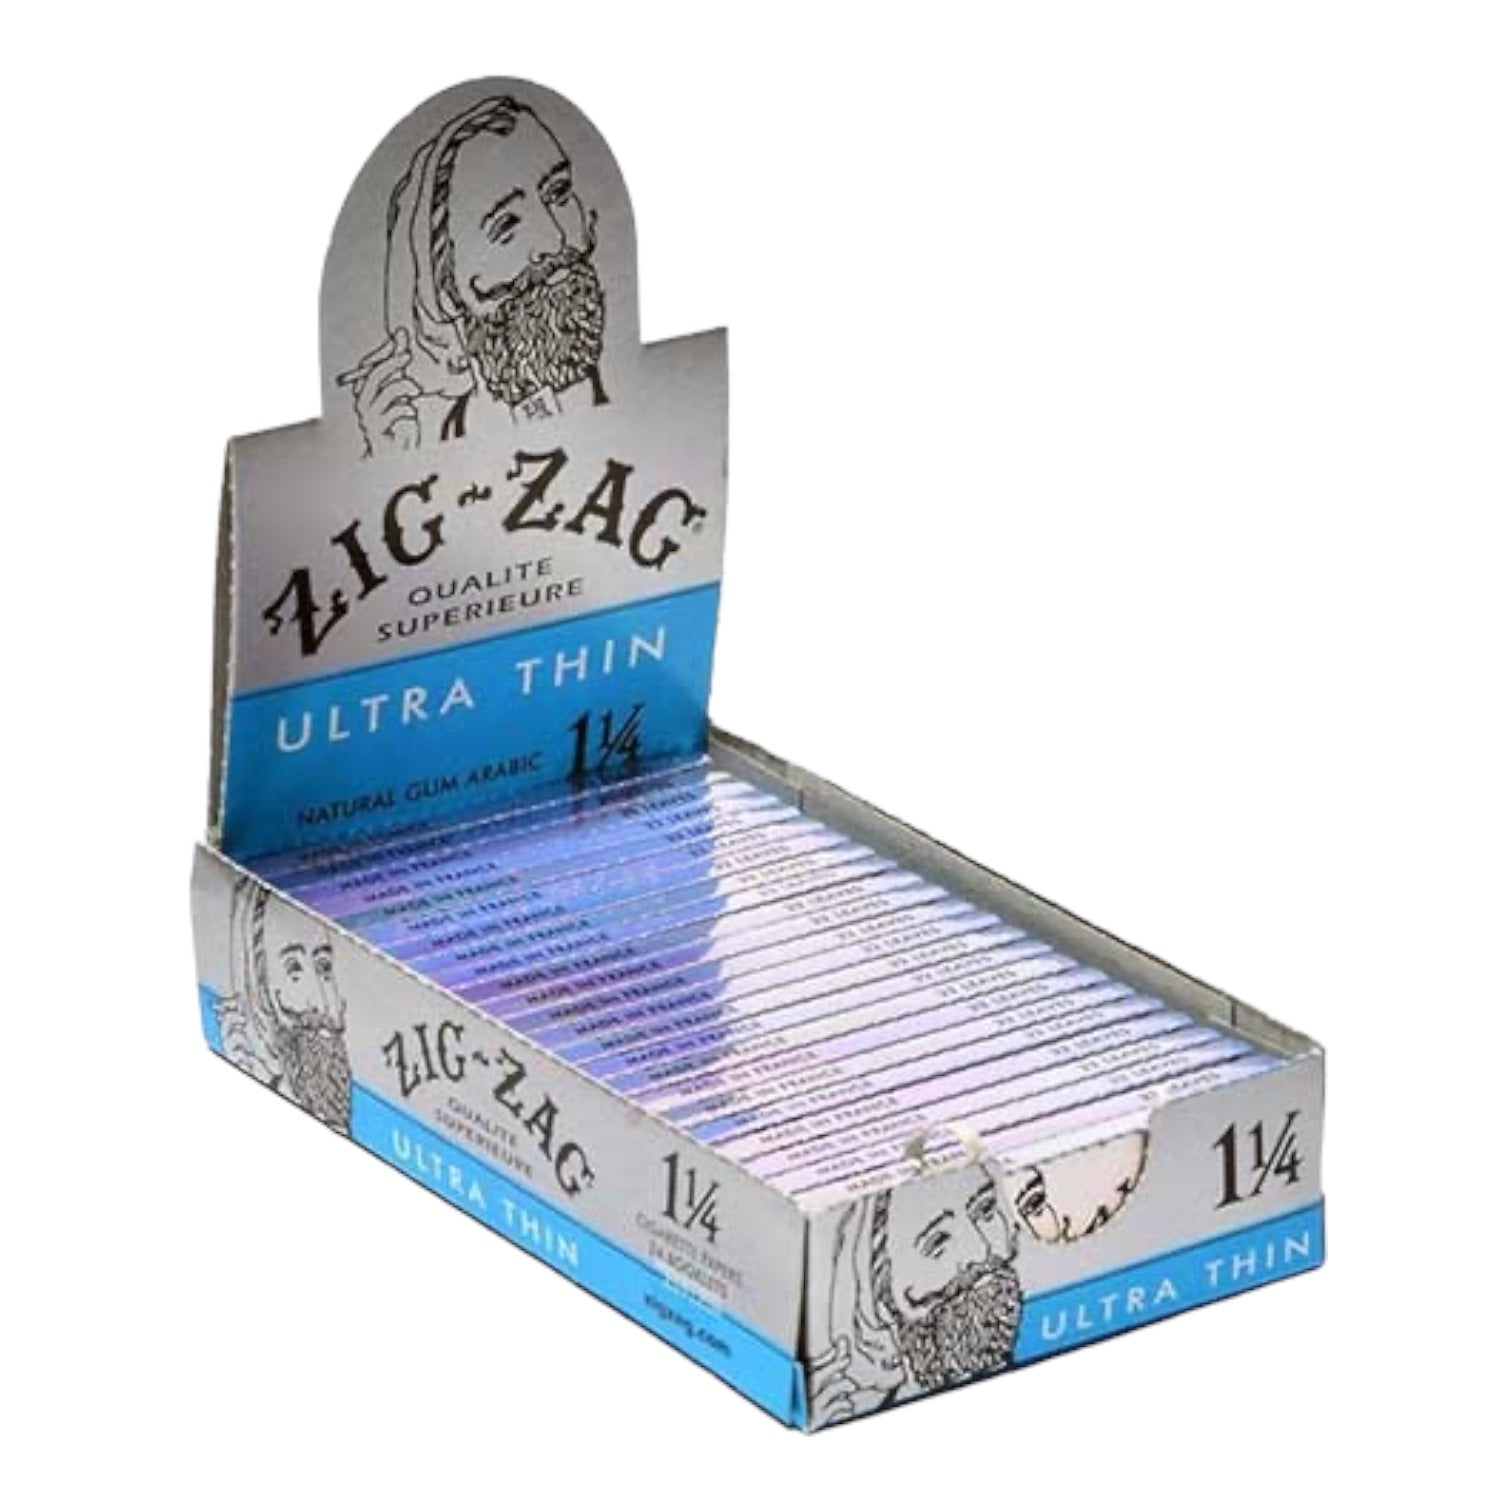 Zig Zag - BOX Of Ultra Thin 1.25 Papers - 24 Pack Box